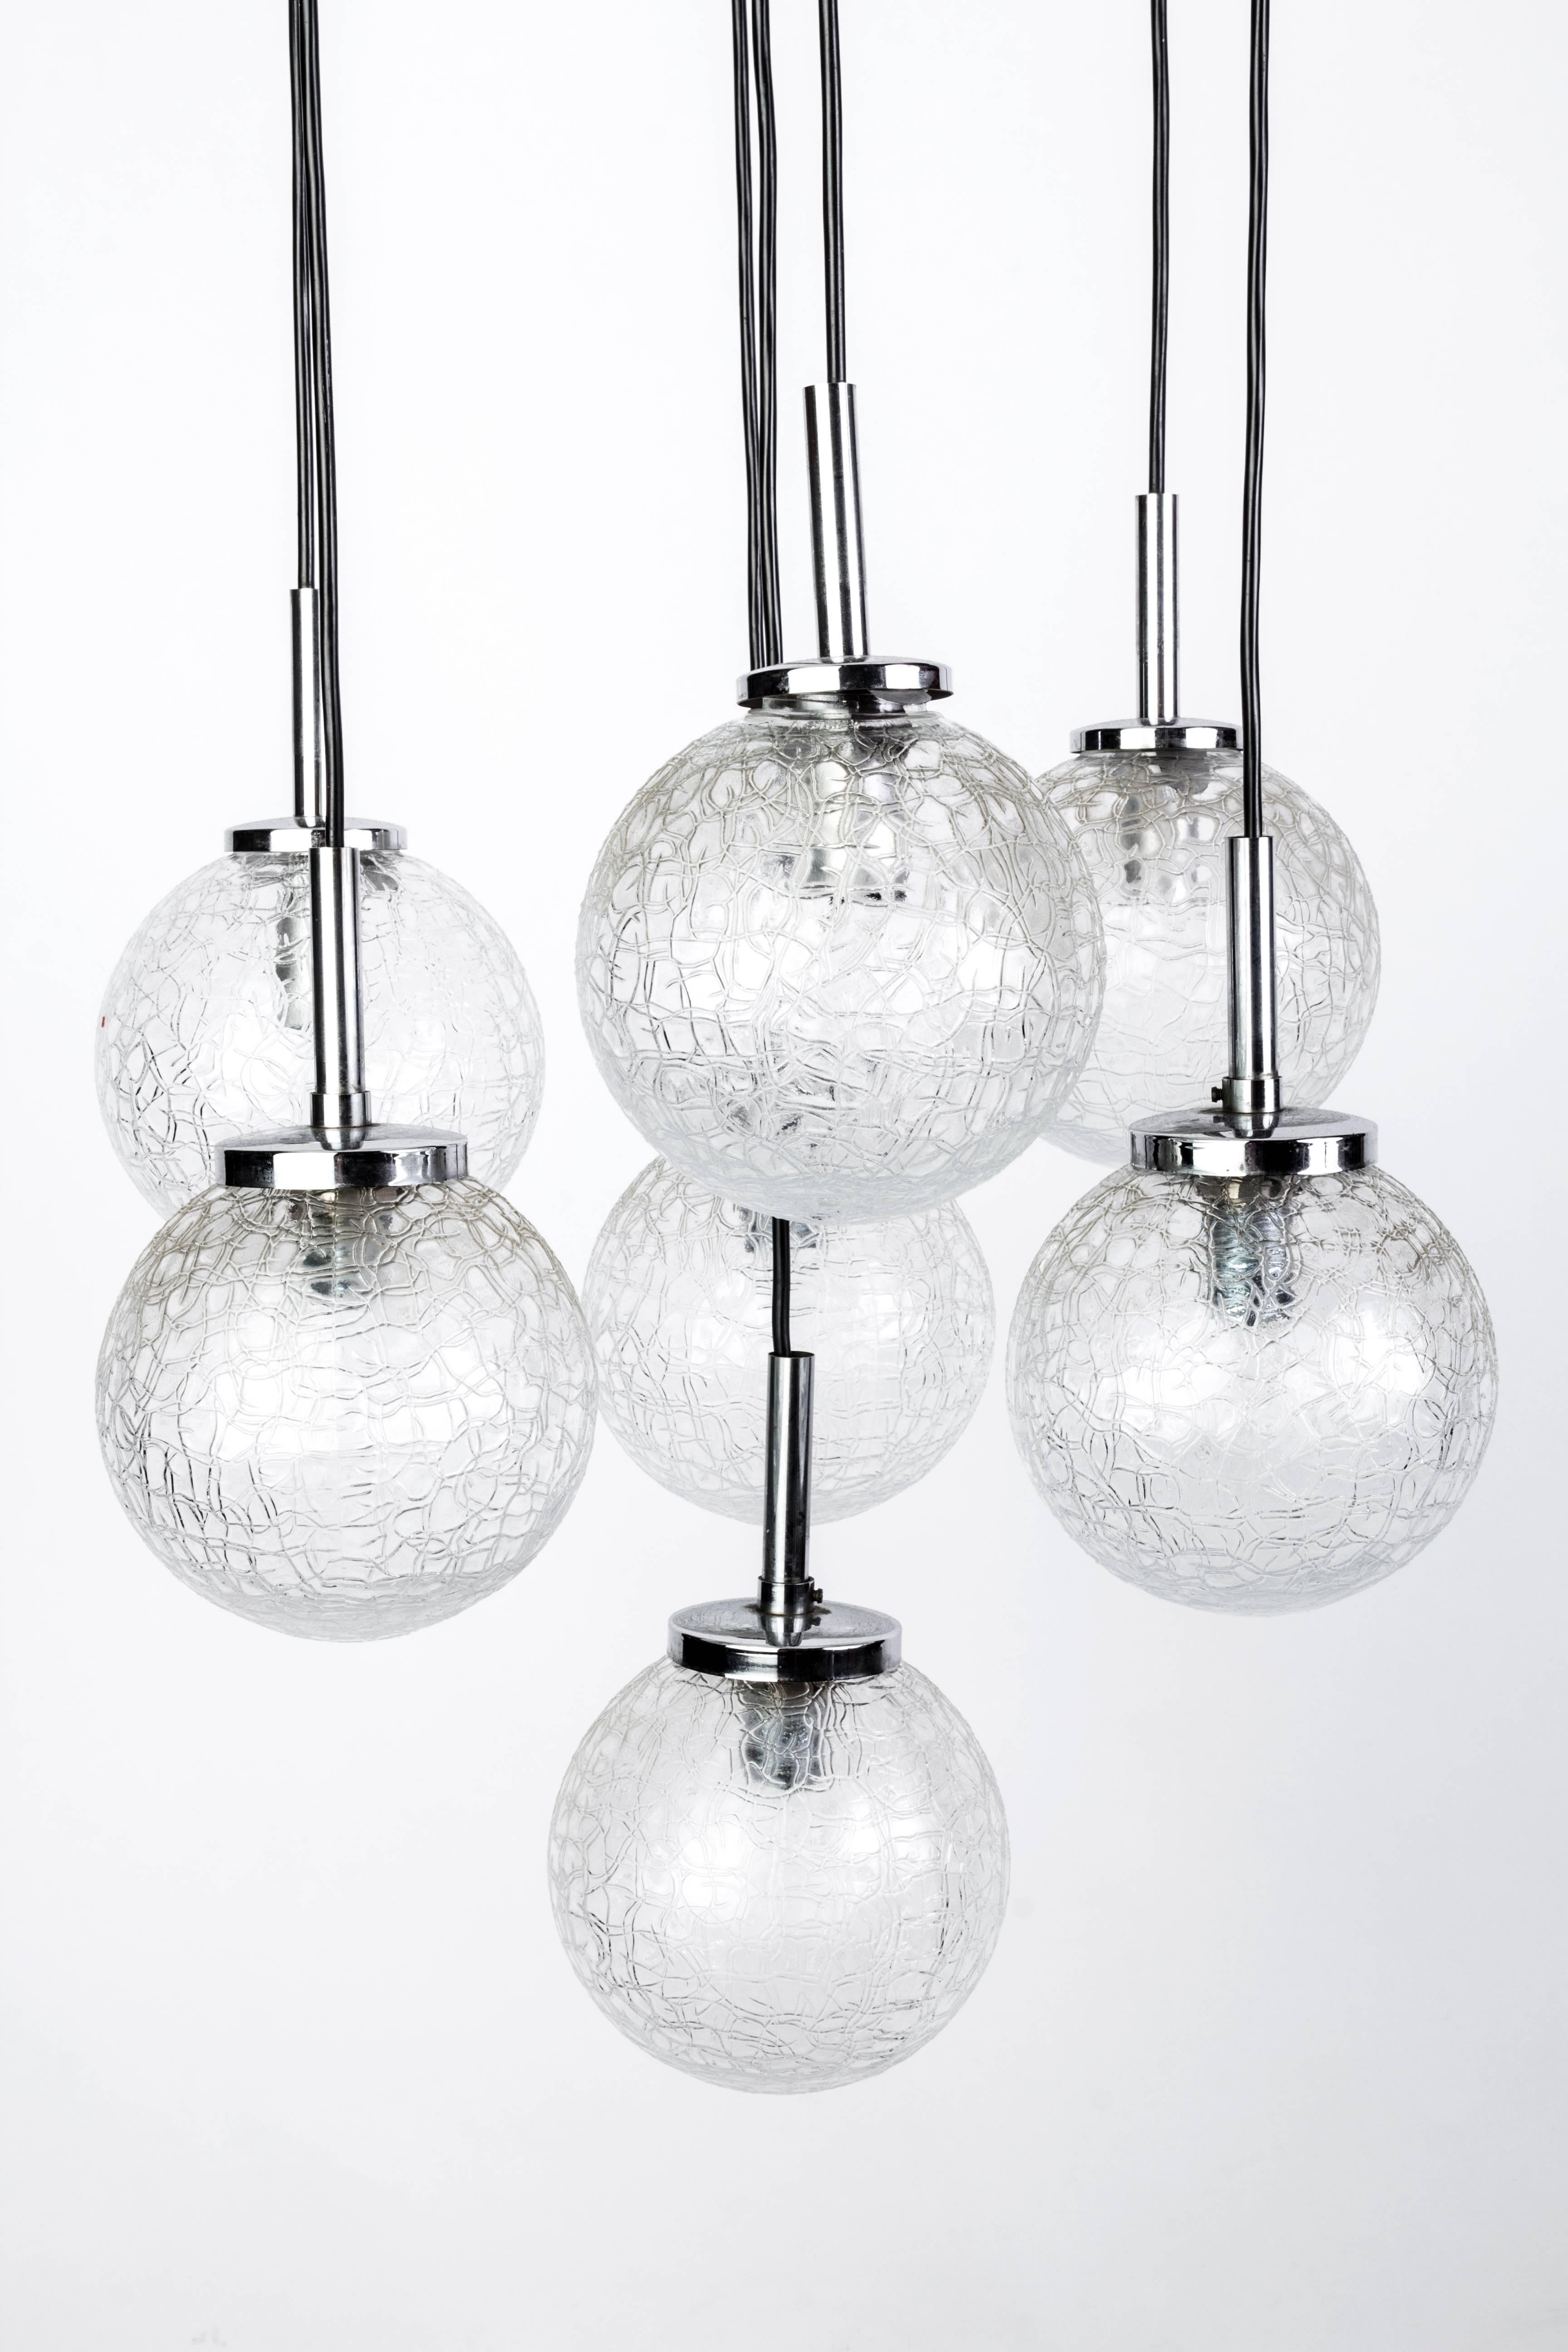 This stunning Mid-Century Modernist chandelier by Doria features seven etched glass ball shades descending from a star form black lacquered base with chrome detailing.
                             